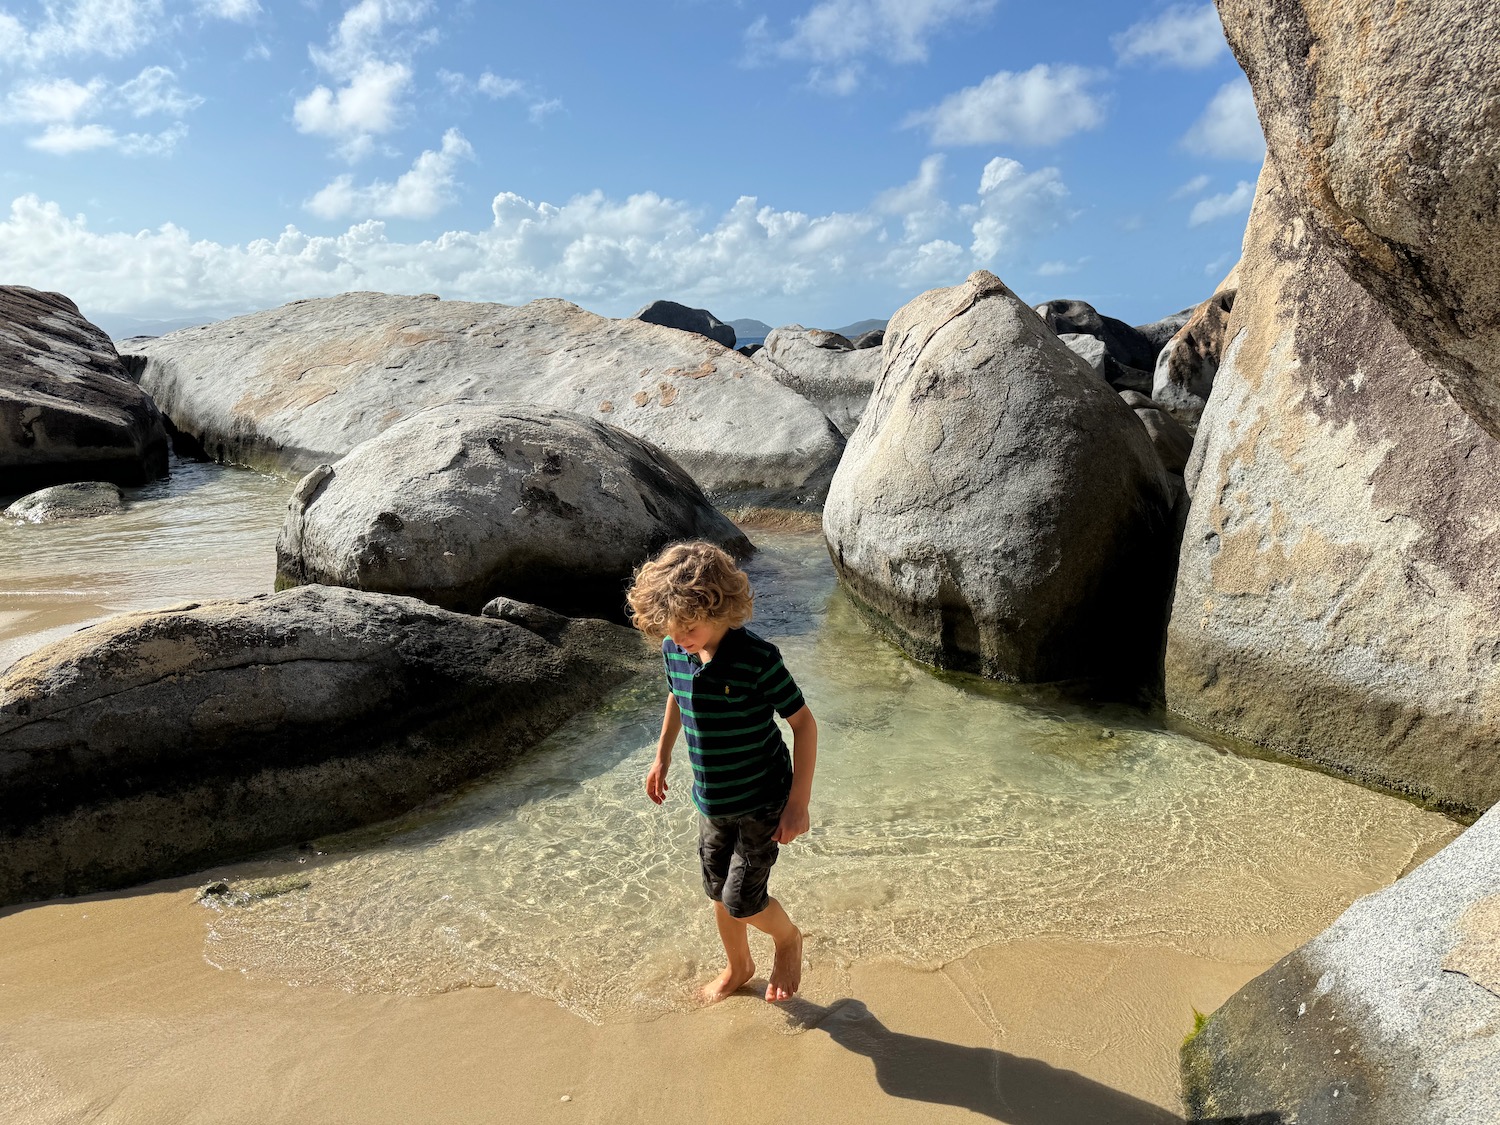 a boy standing on a beach with large rocks